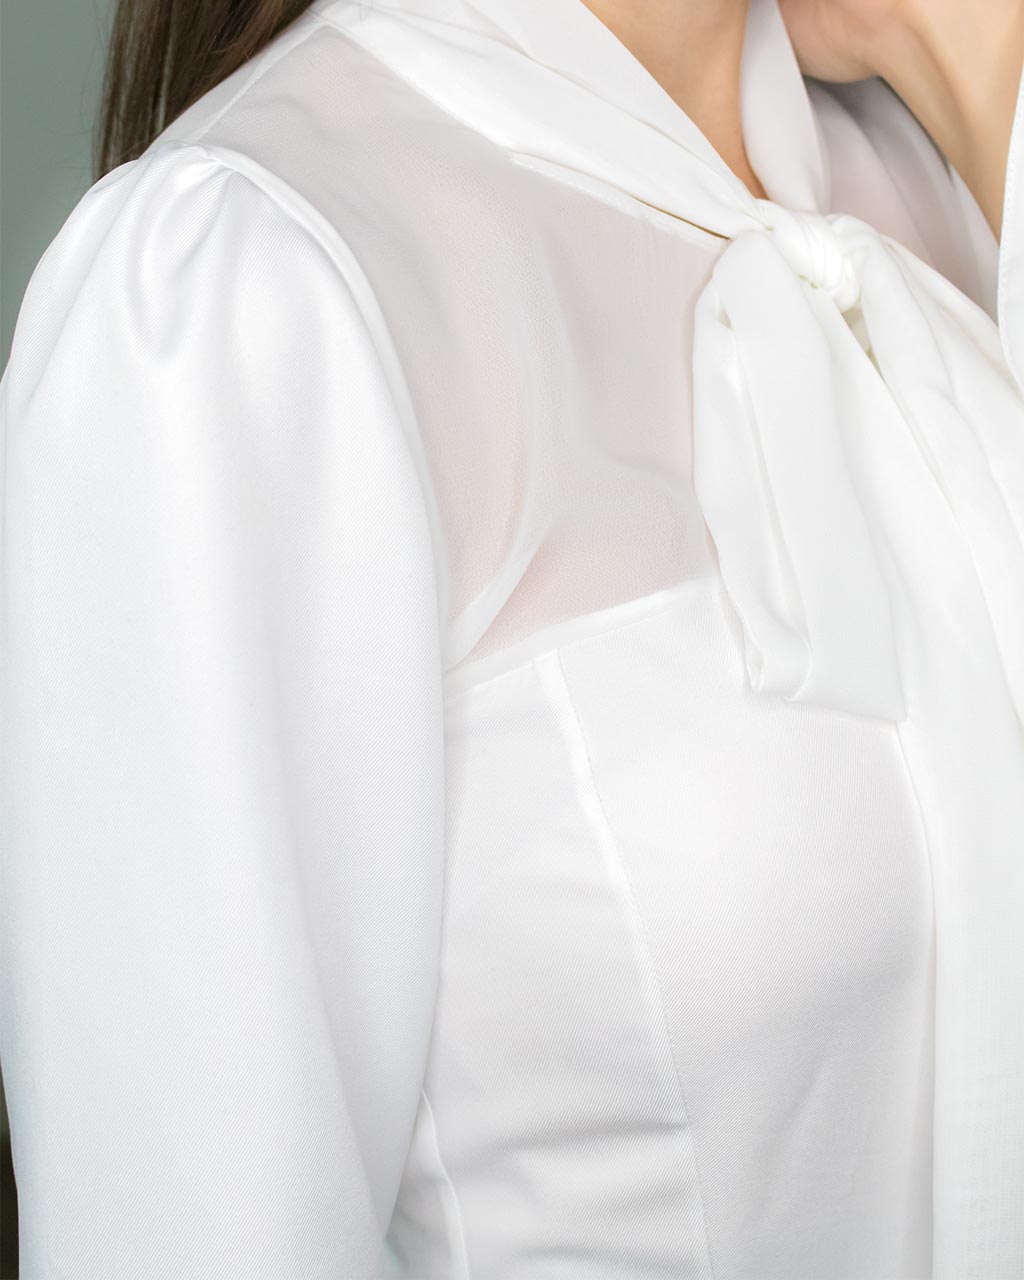 Classy elegant shoulder detail of white party going out office work peplum blouse by ADKN made from recycled PET bottles